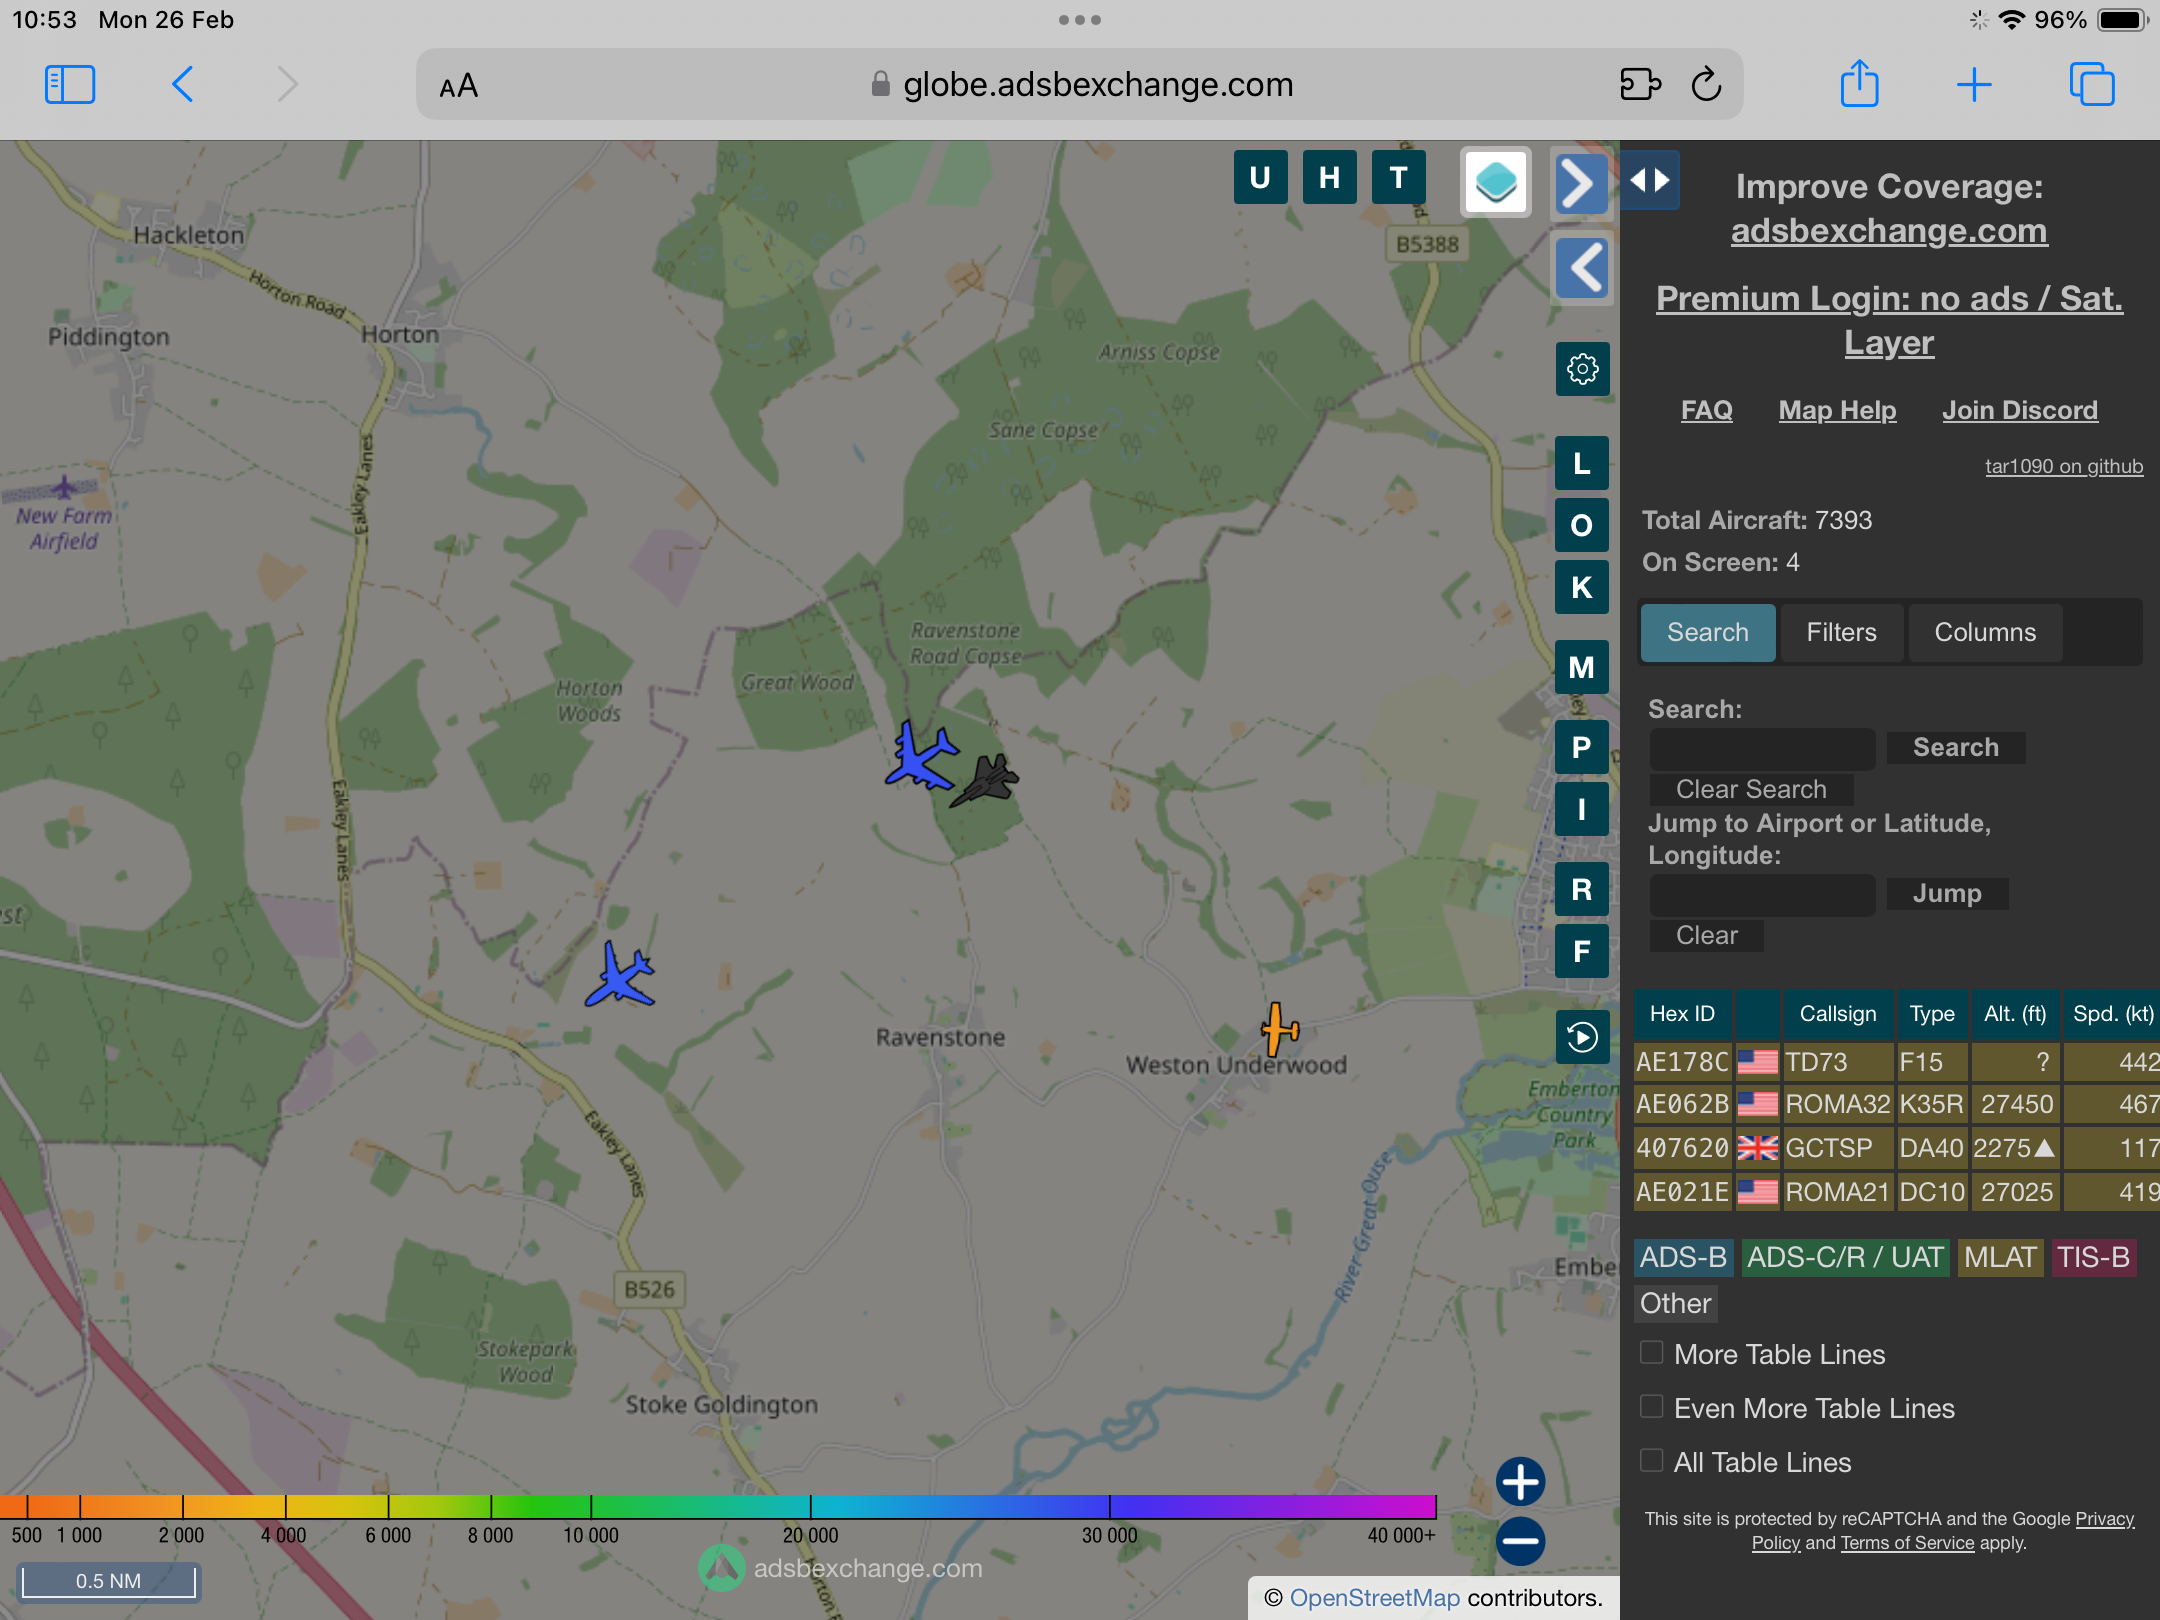 Cool things seen on FlightRadar - Page 572 - Boats, Planes & Trains - PistonHeads UK